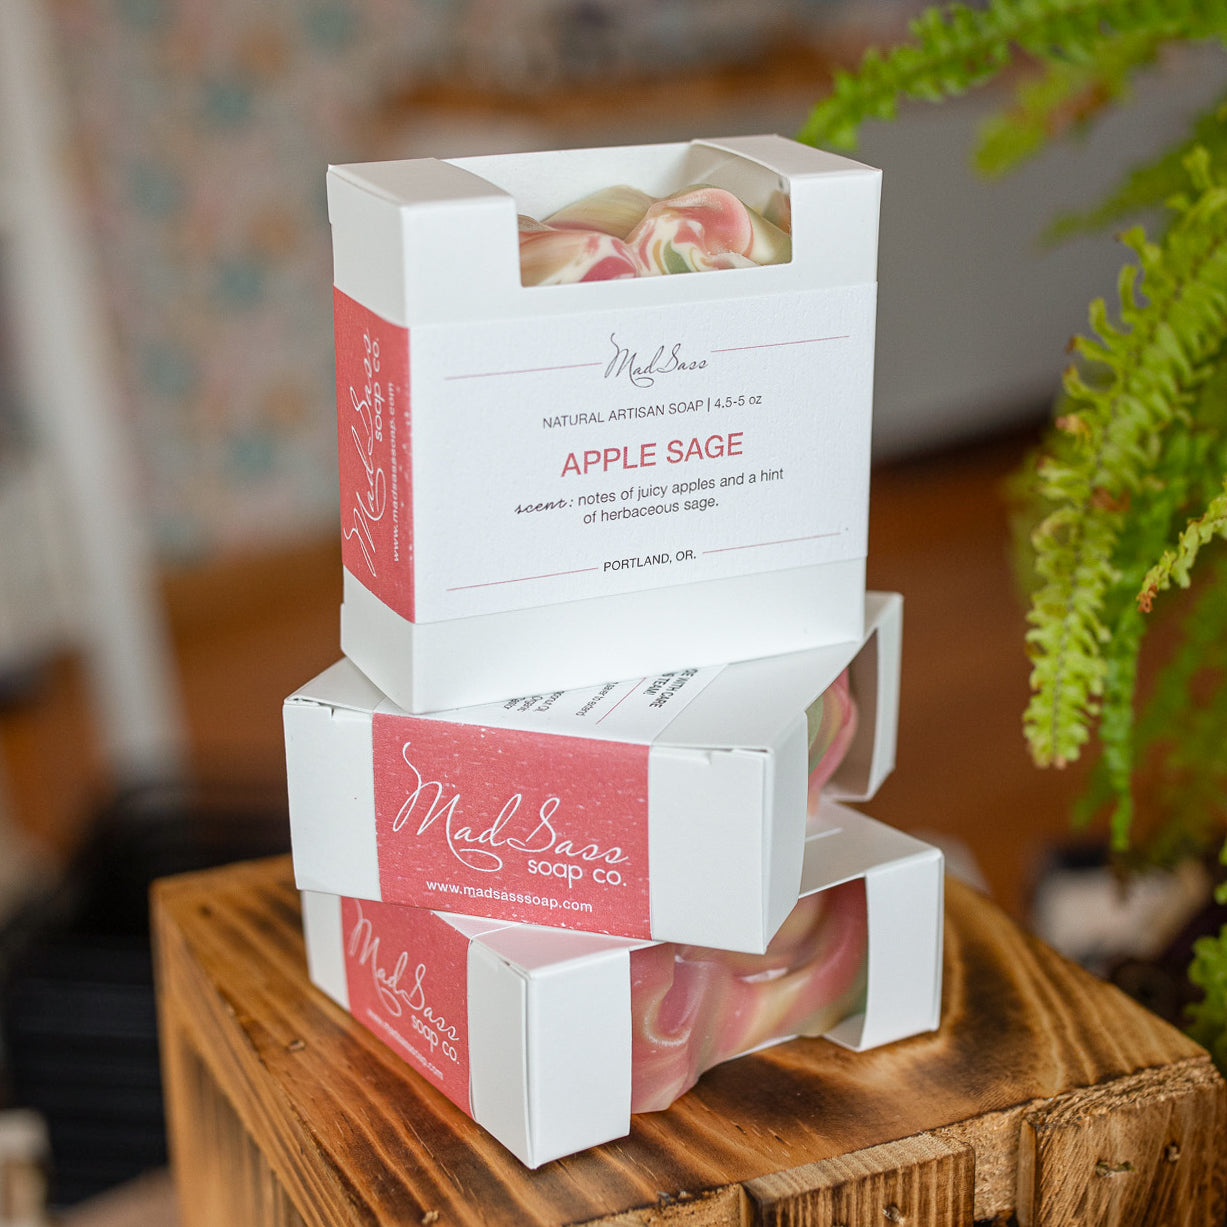 Three boxes of Apple Sage soap stacked on top of each other on a wooden block.